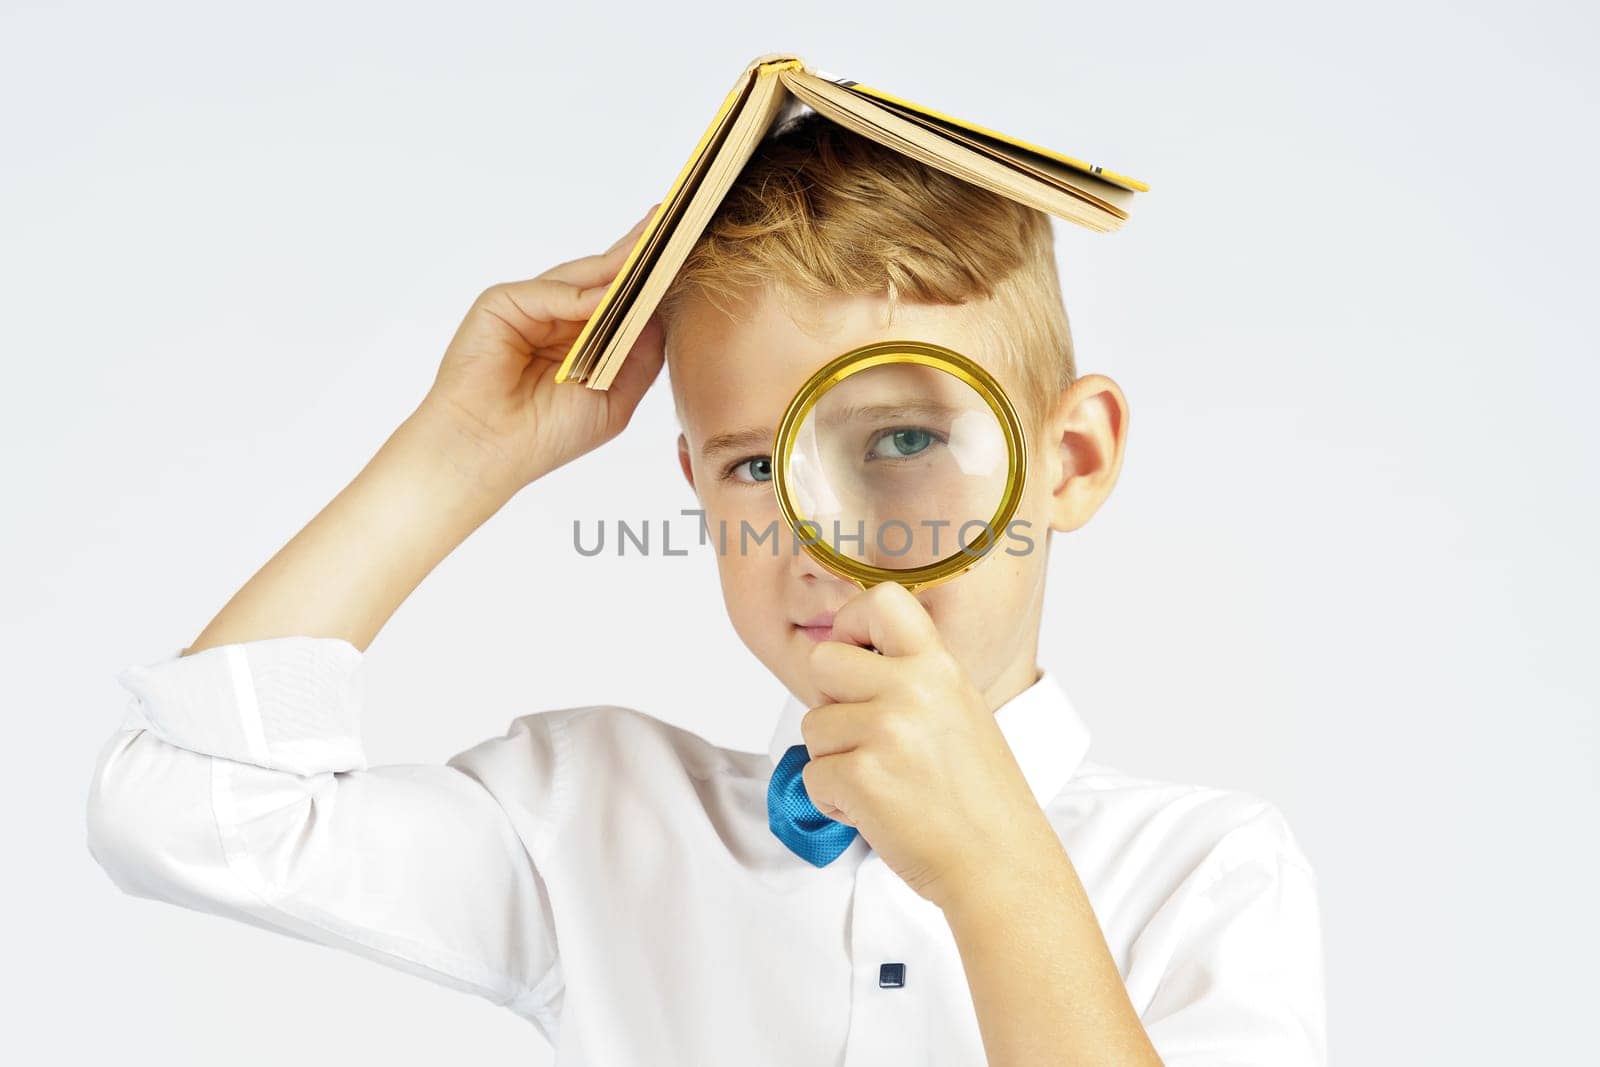 The schoolboy put the book on his head and looks through a magnifying glass. Isolated background. by Sd28DimoN_1976